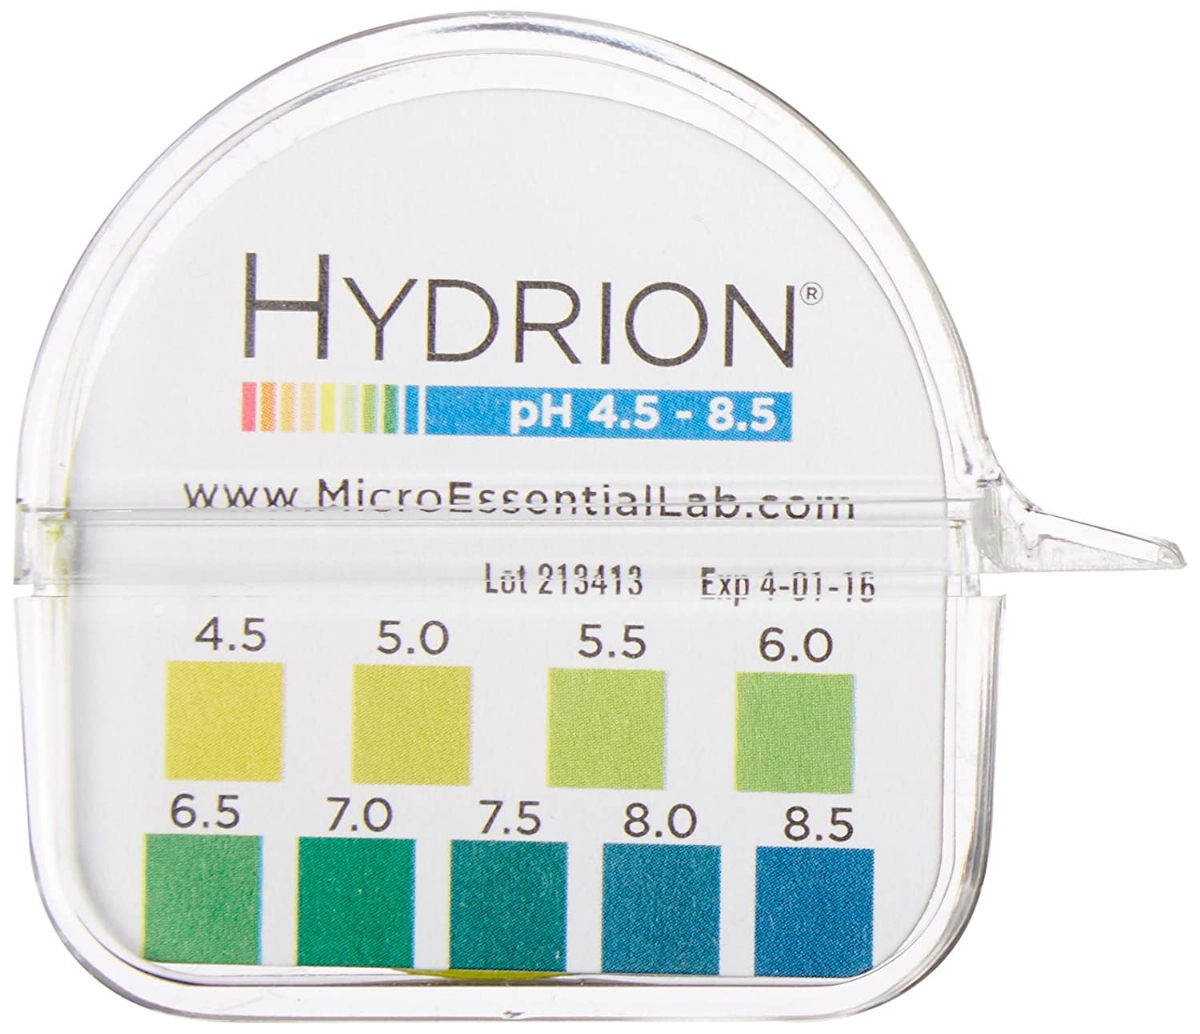 Test Tape Dispenser Hydrion Papers Strips Made for Saliva Or Urine Testing-Range Is in 2 Intervals & From 5.5 To 8.0 Approx Ph Check Body for Alkaline or Acid Environment 100 Tests 